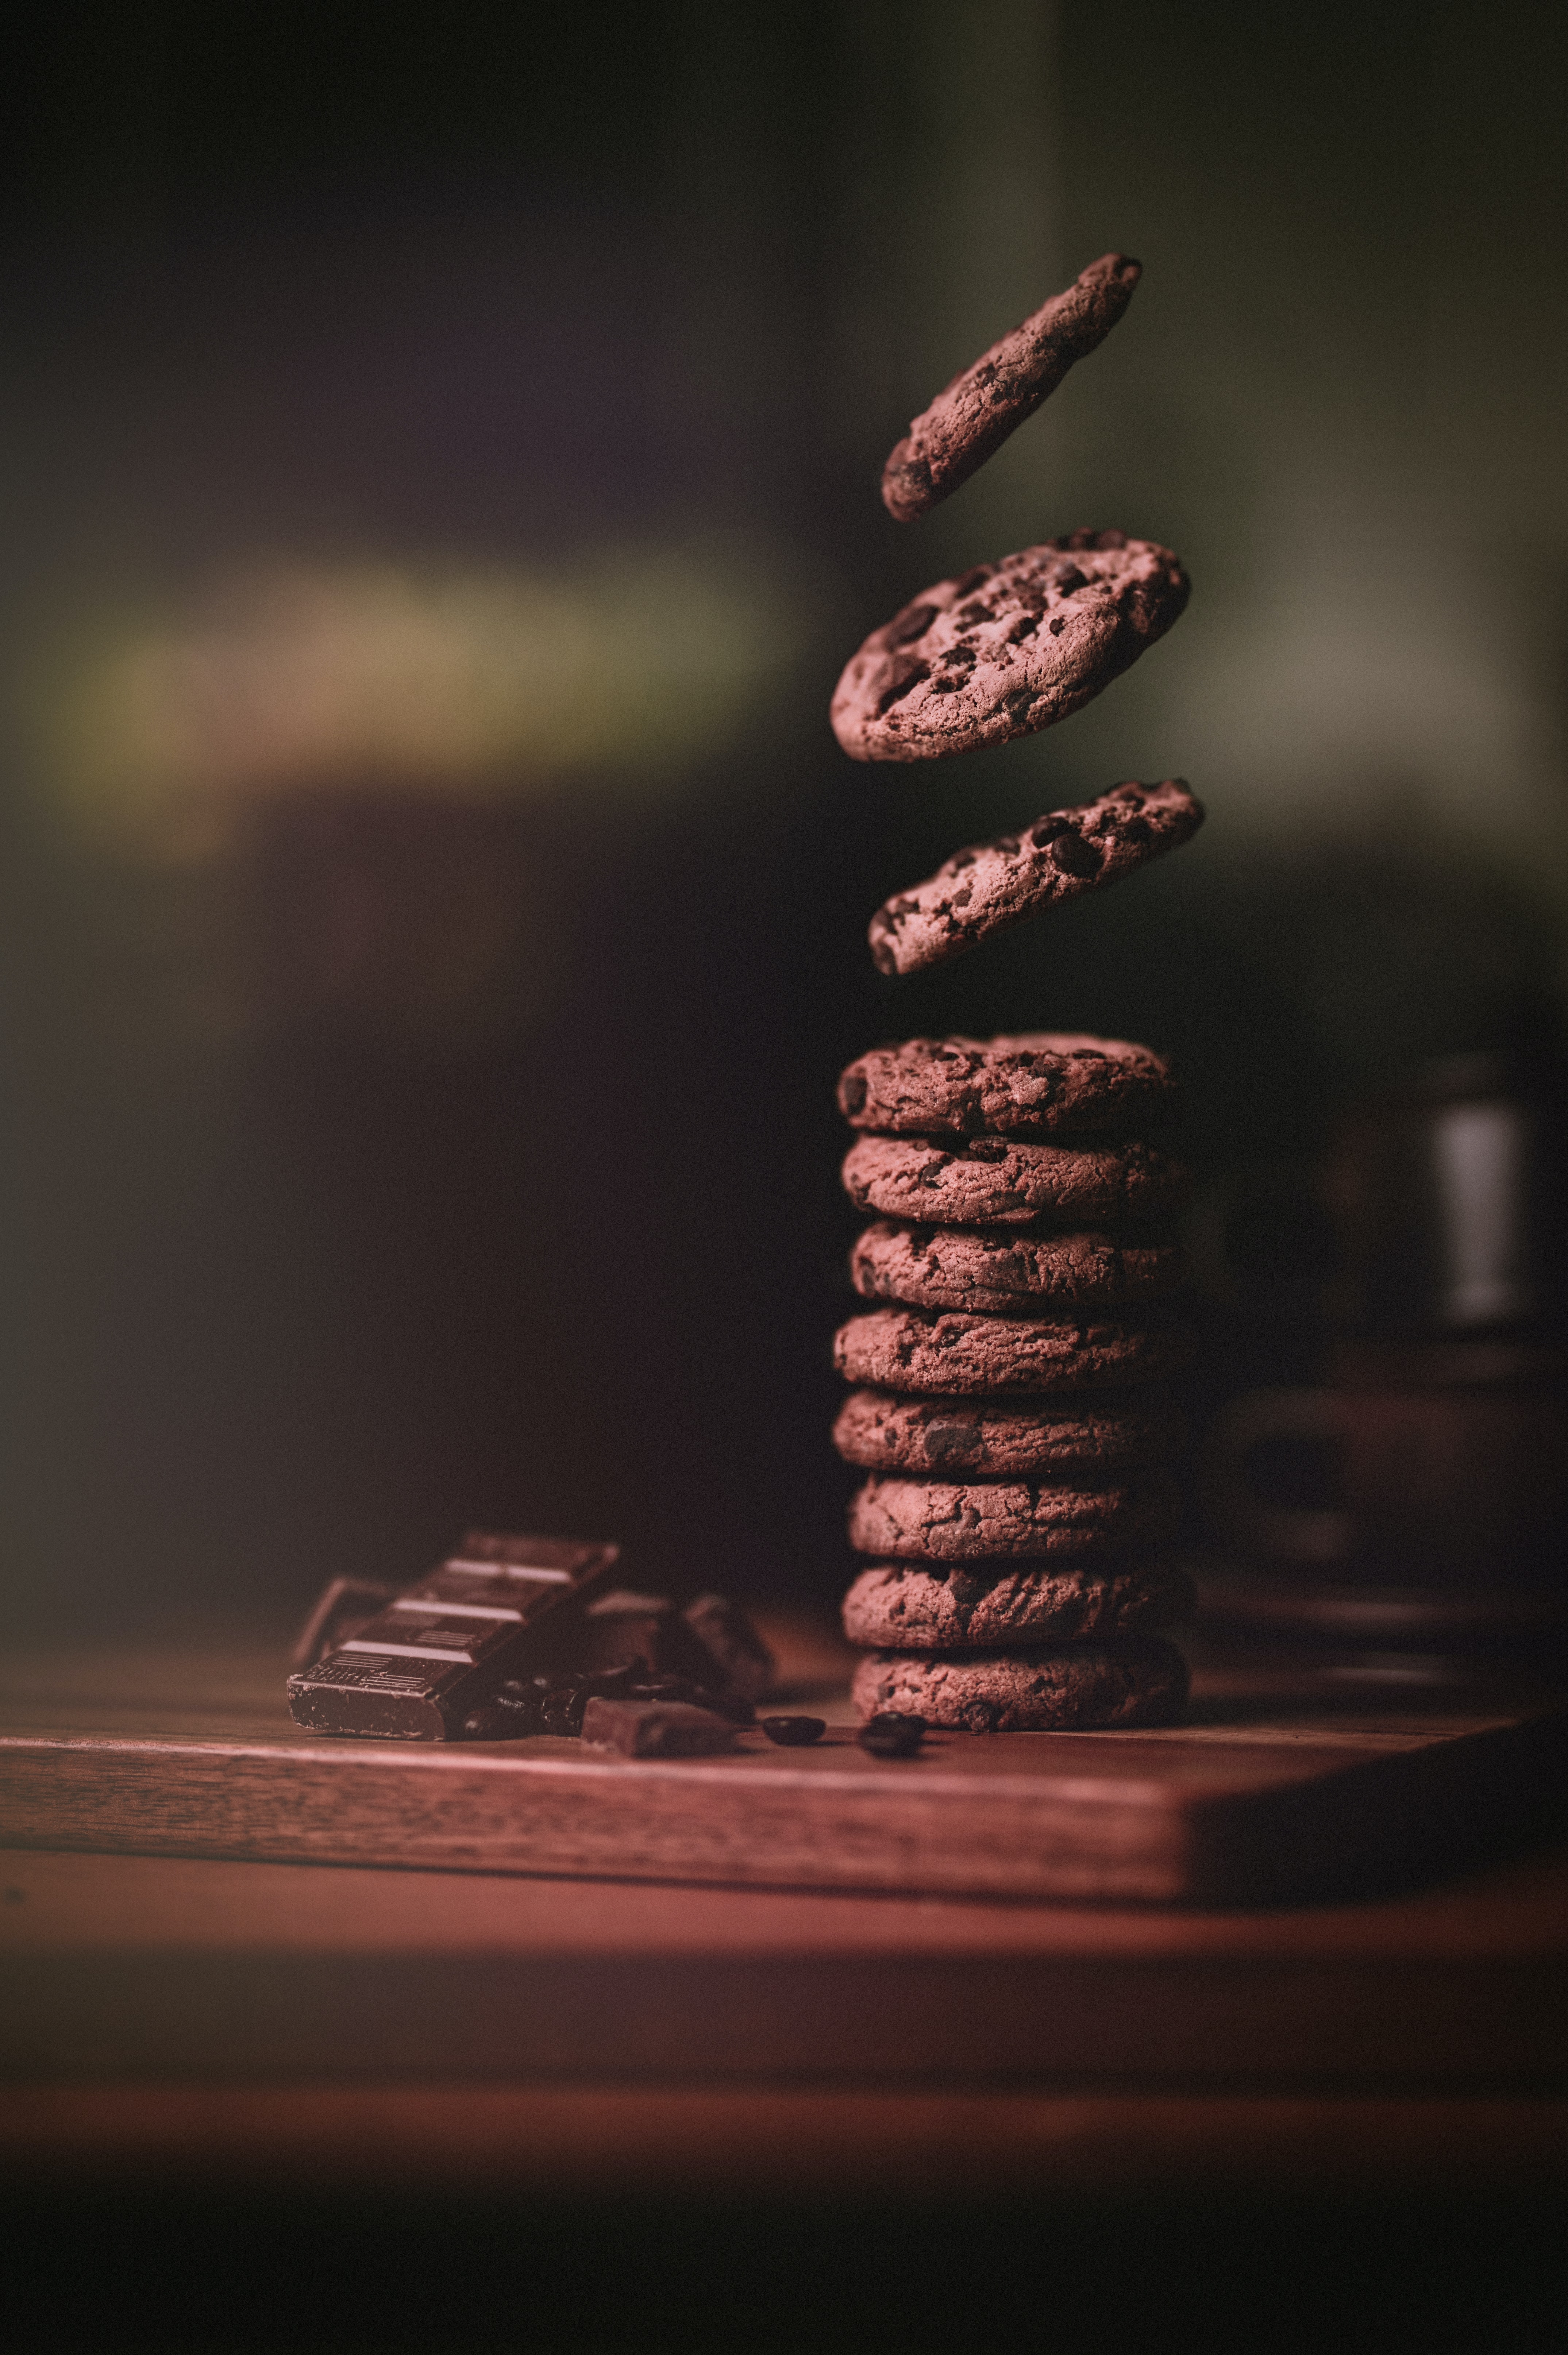 baking, food, chocolate, cookies, bakery products, levitation images